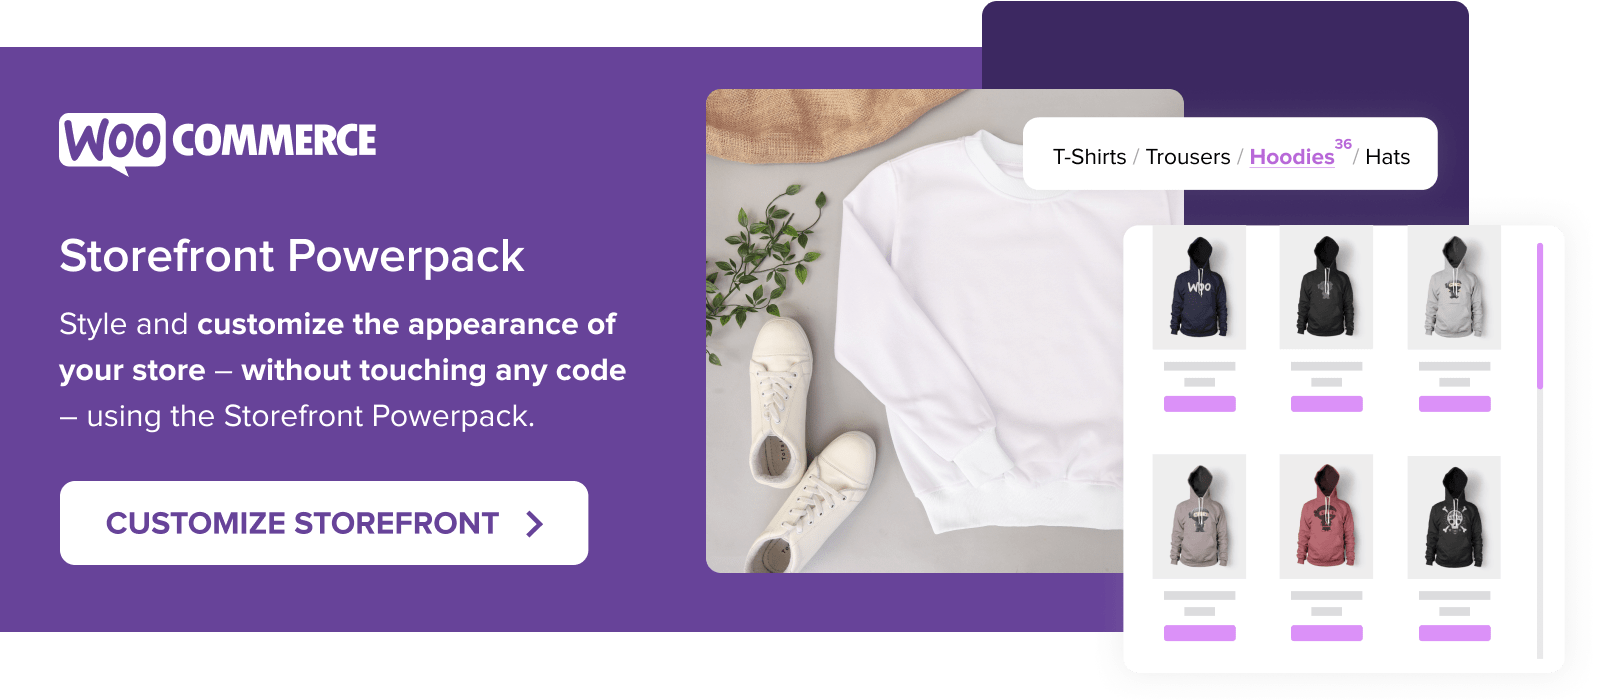 Customize the appearance of your store with Storefront Powerpack